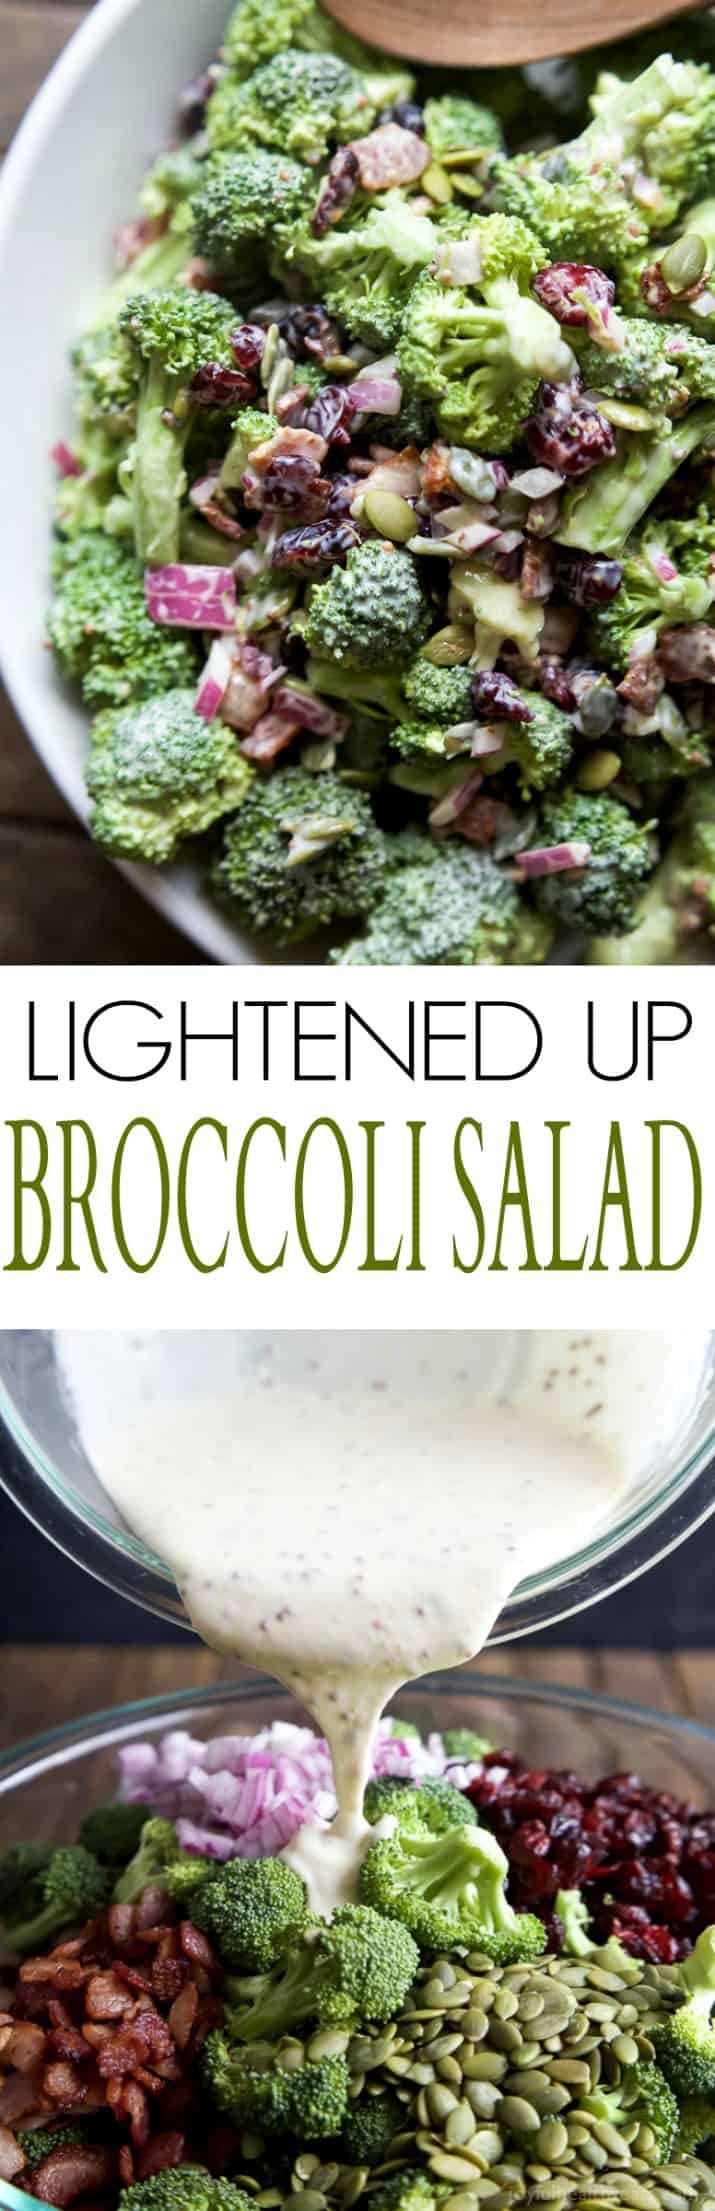 Lightened up Broccoli Salad filled with fresh broccoli, cranberries, red onion, pepitas, BACON, and creamy dressing make with greek yogurt! This salad will be a hit and you'll love the short cut I take! | joyfulhealthyeats.com #glutenfree